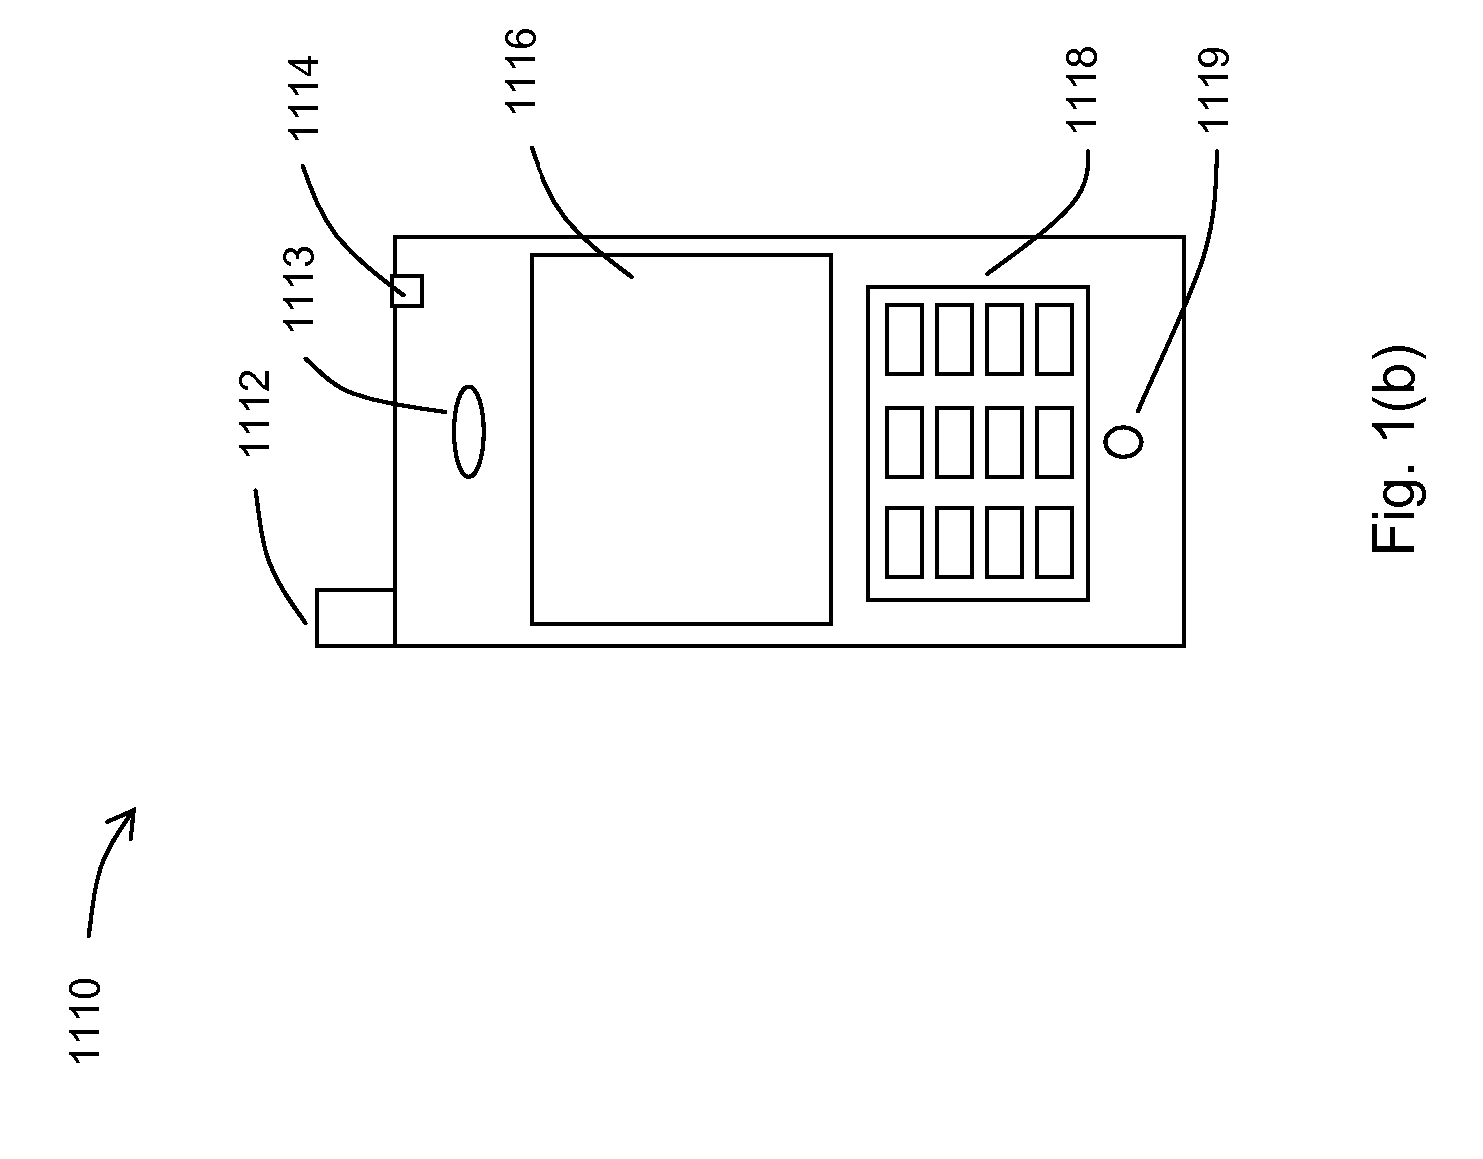 System and Method for Providing Digital Content on Mobile Devices